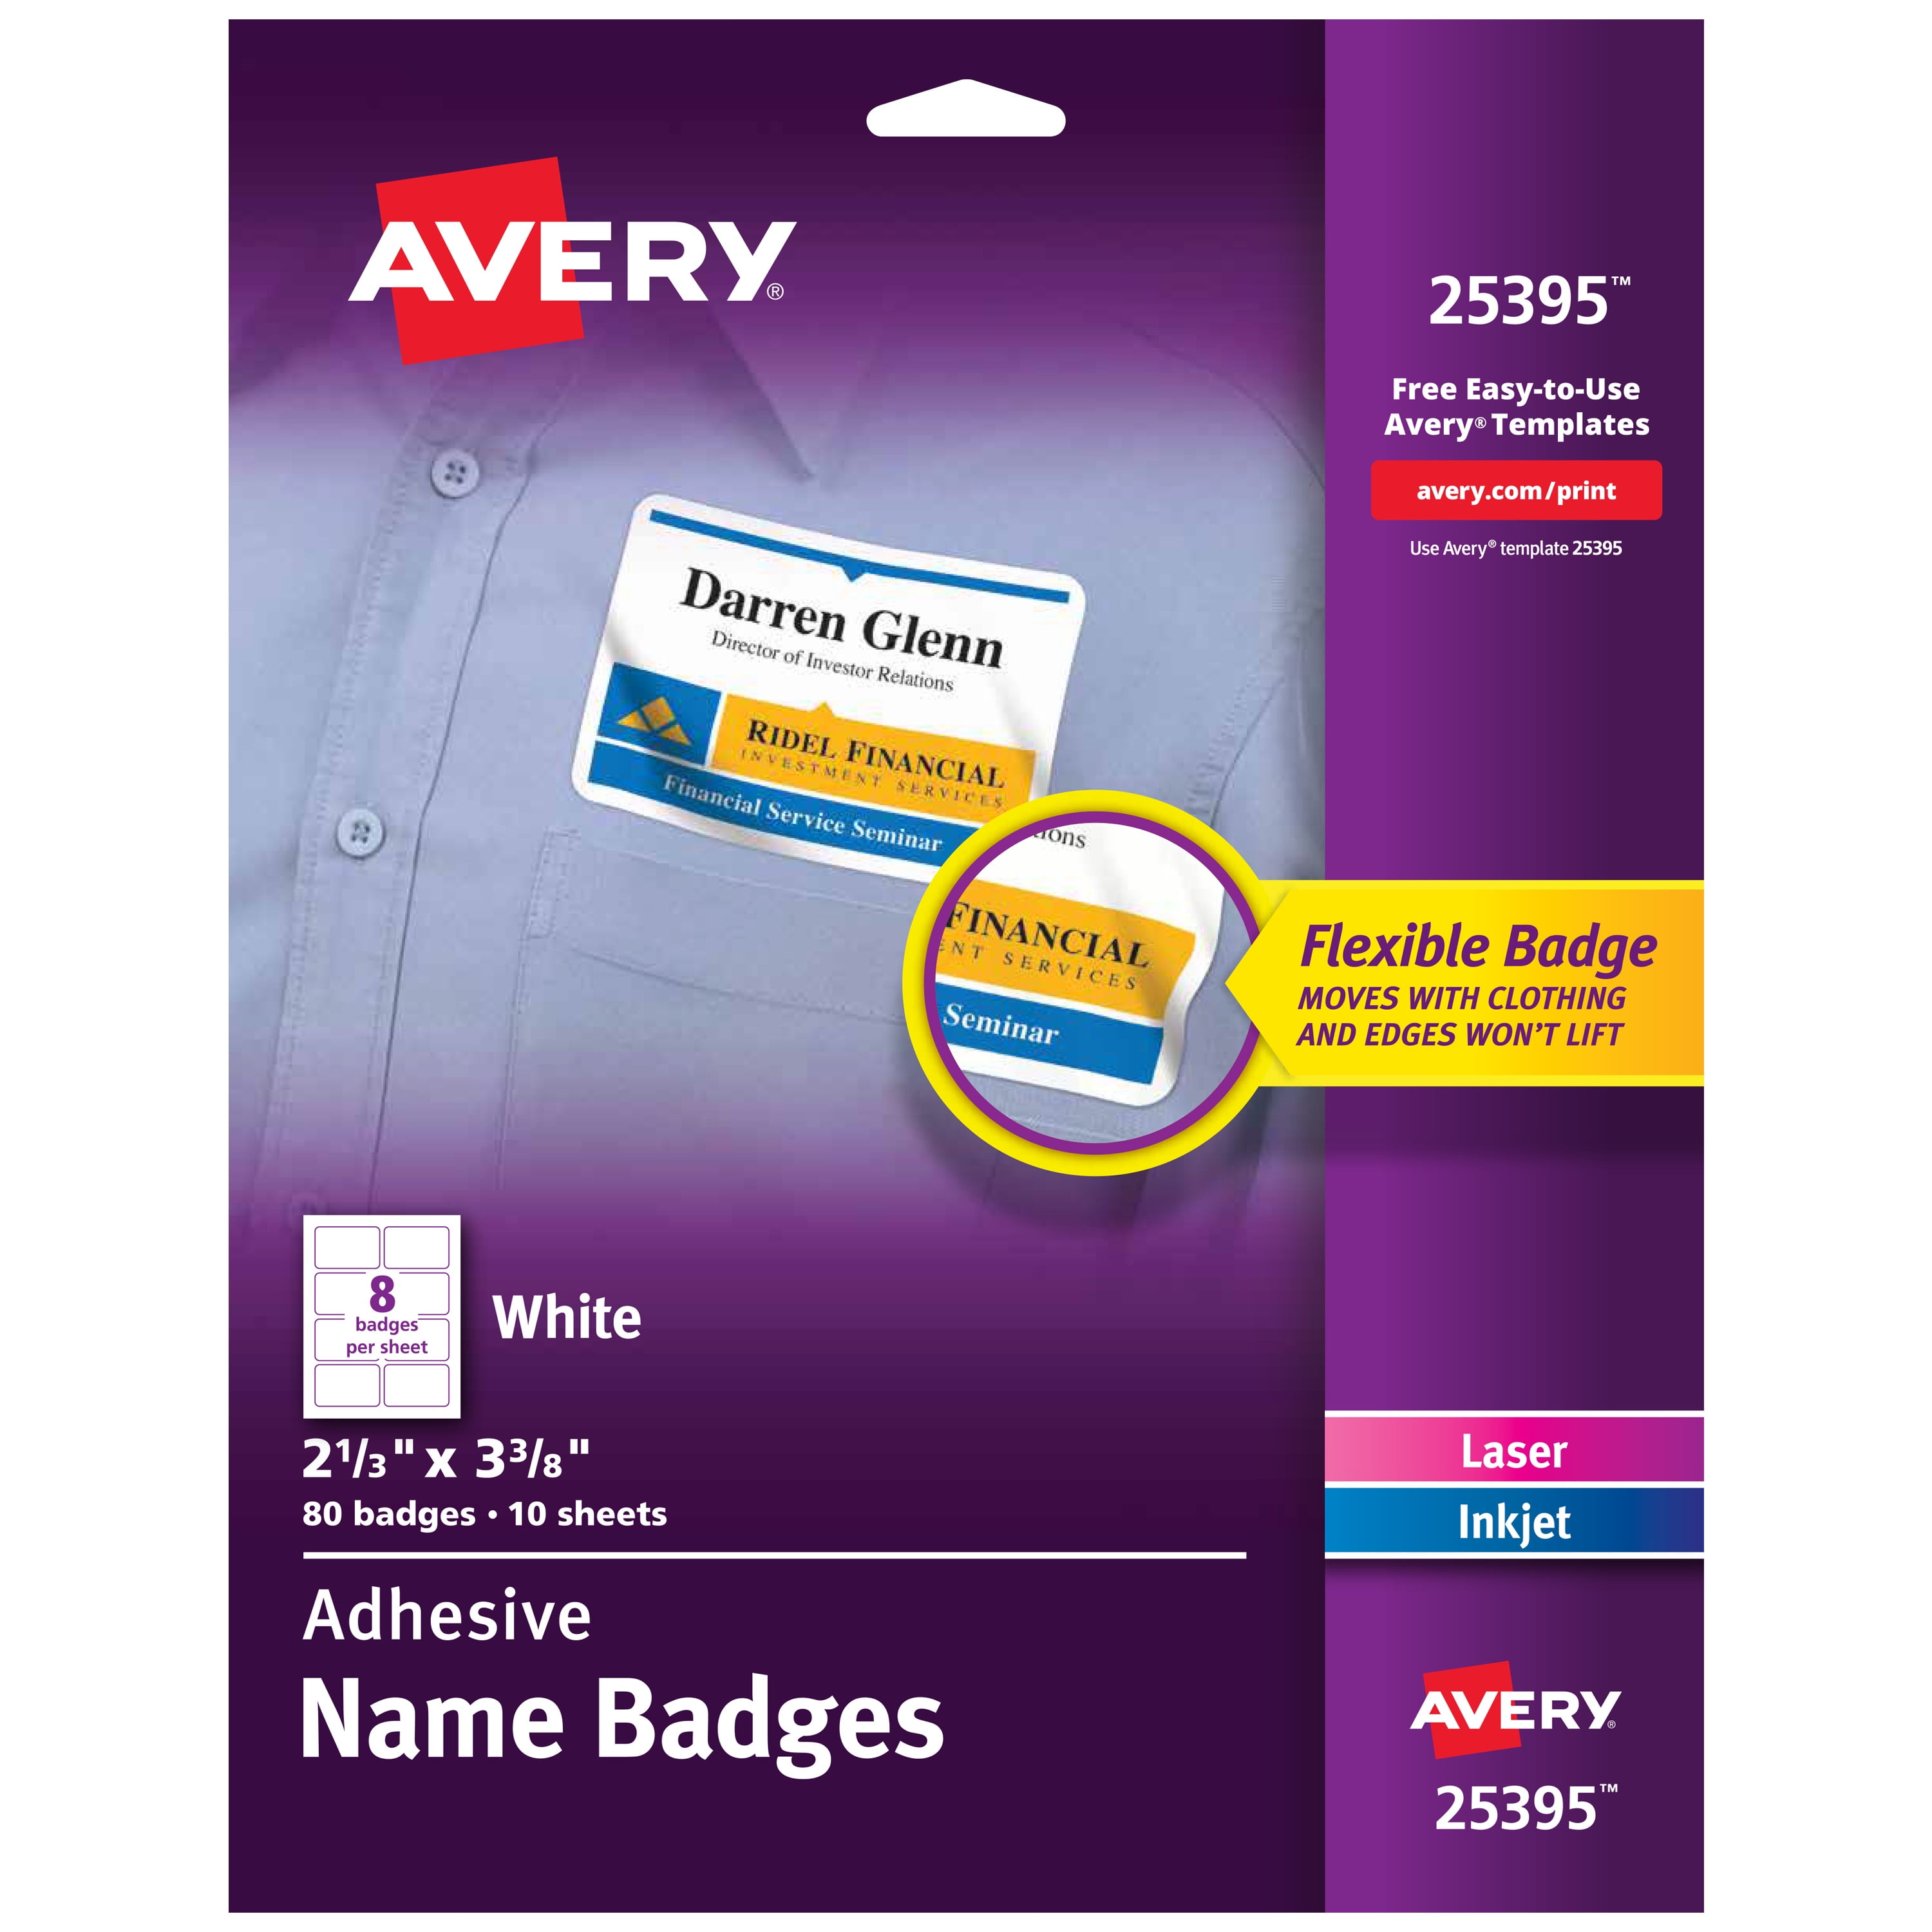 Avery Adhesive Name Badges, 22223-22223/2223" x 2223-2223/23", 230 Badges (222235222395) For 33 Up Label Template Word